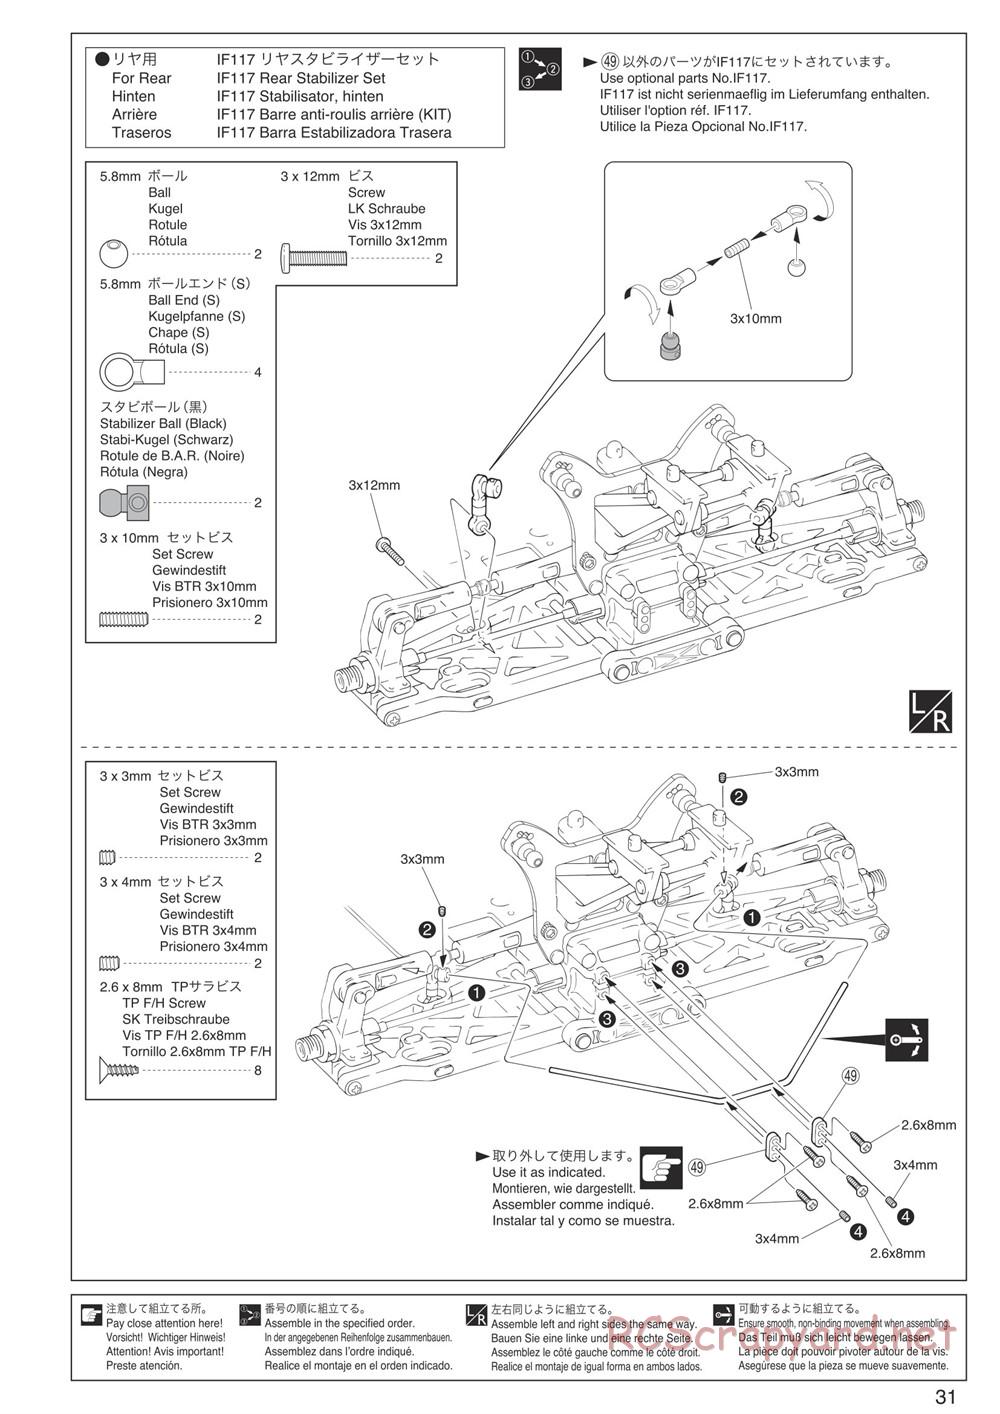 Kyosho - Inferno Neo 3.0 - Manual - Page 30